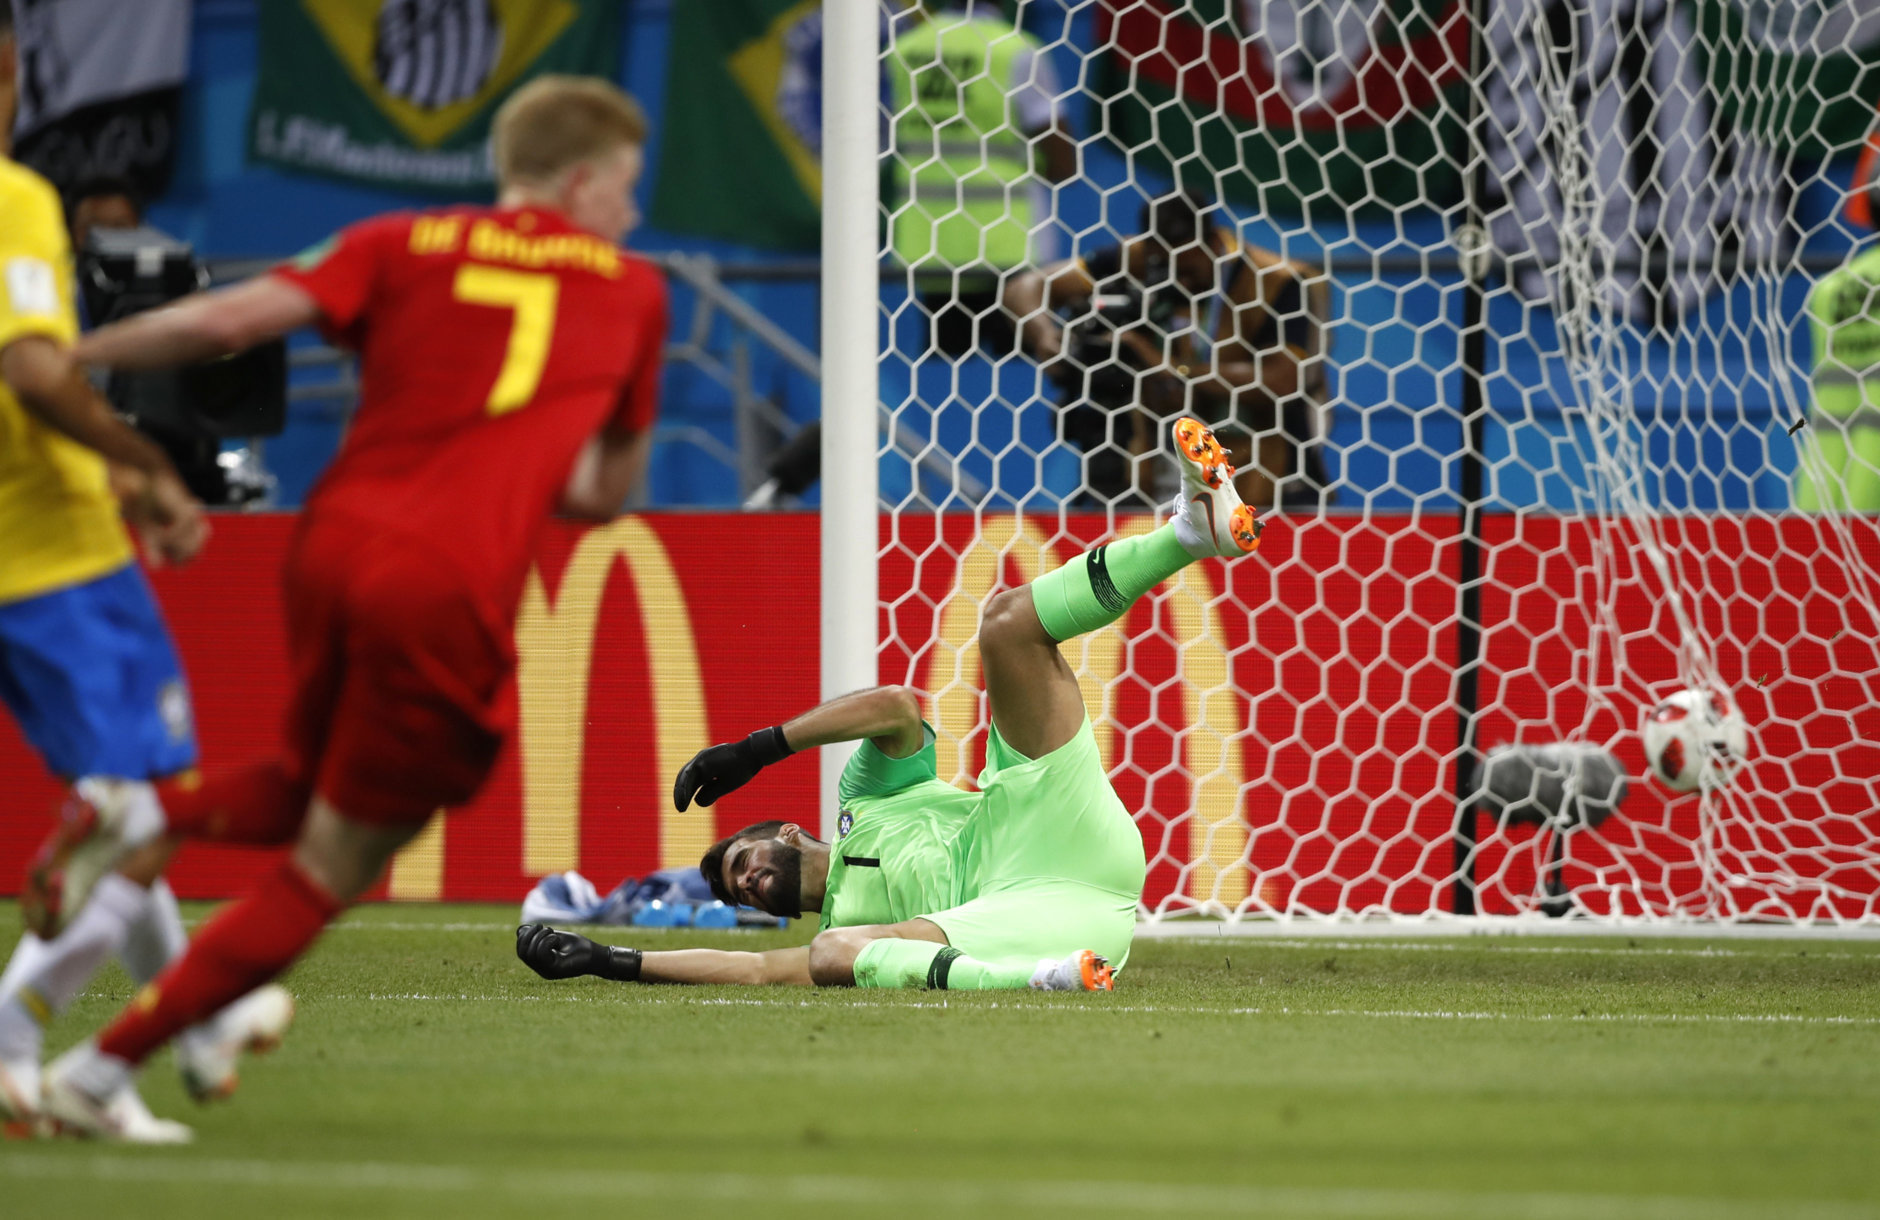 Brazil goalkeeper Alisson sits on the pitch after Belgium's Kevin De Bruyne, left, scored his side's second goal during the quarterfinal match between Brazil and Belgium at the 2018 soccer World Cup in the Kazan Arena, in Kazan, Russia, Friday, July 6, 2018. (AP Photo/Francisco Seco)